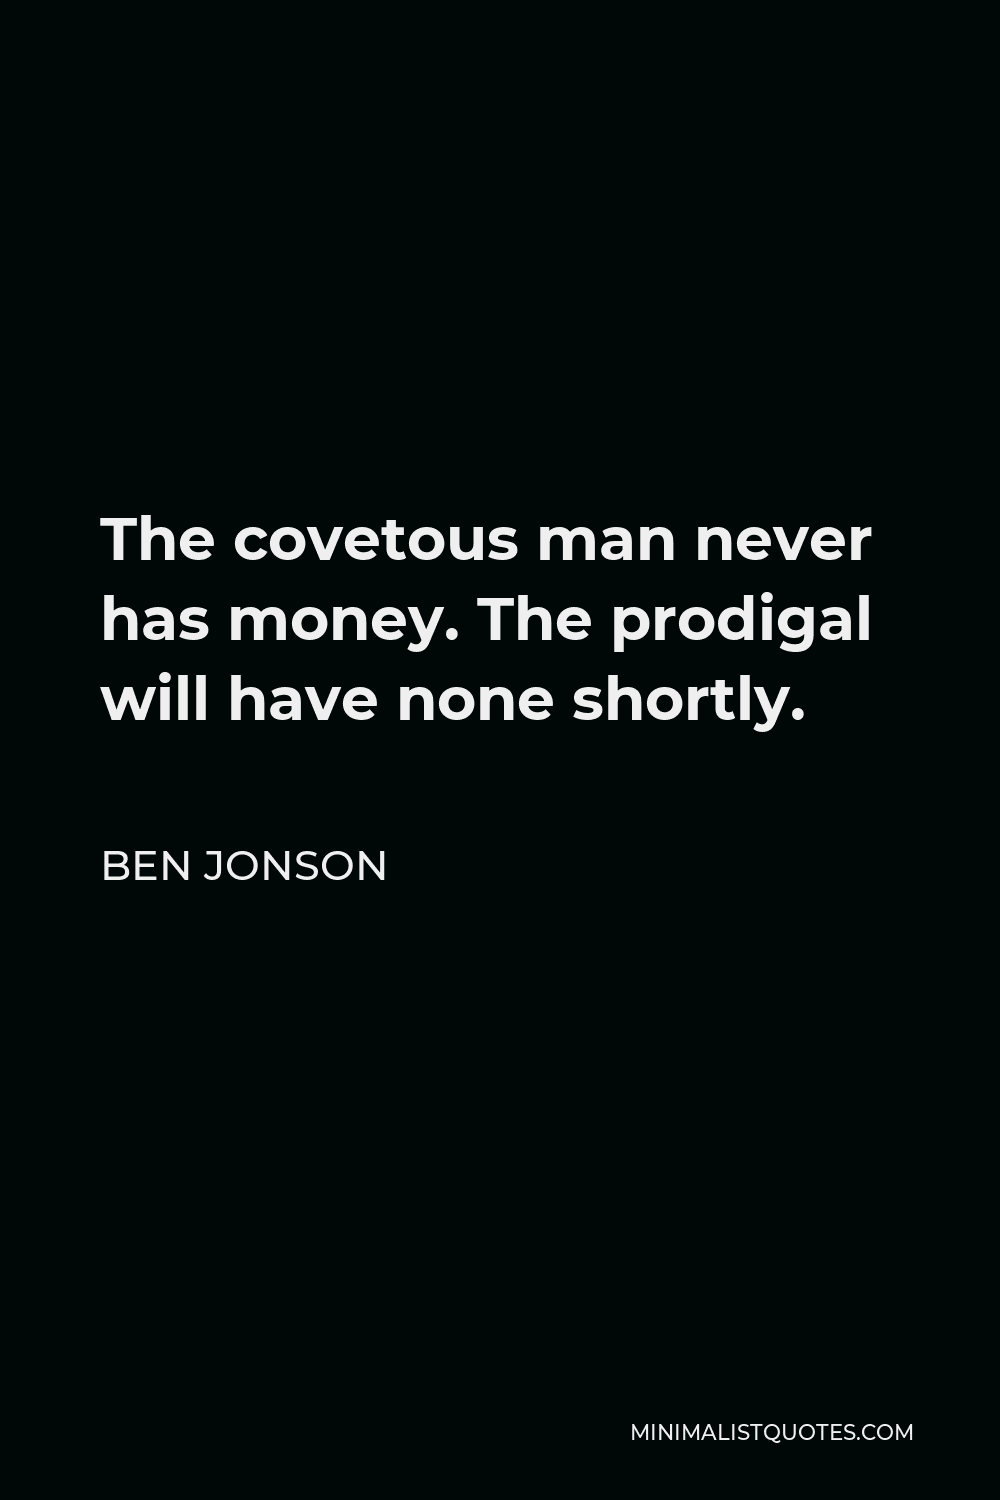 Ben Jonson Quote - The covetous man never has money. The prodigal will have none shortly.